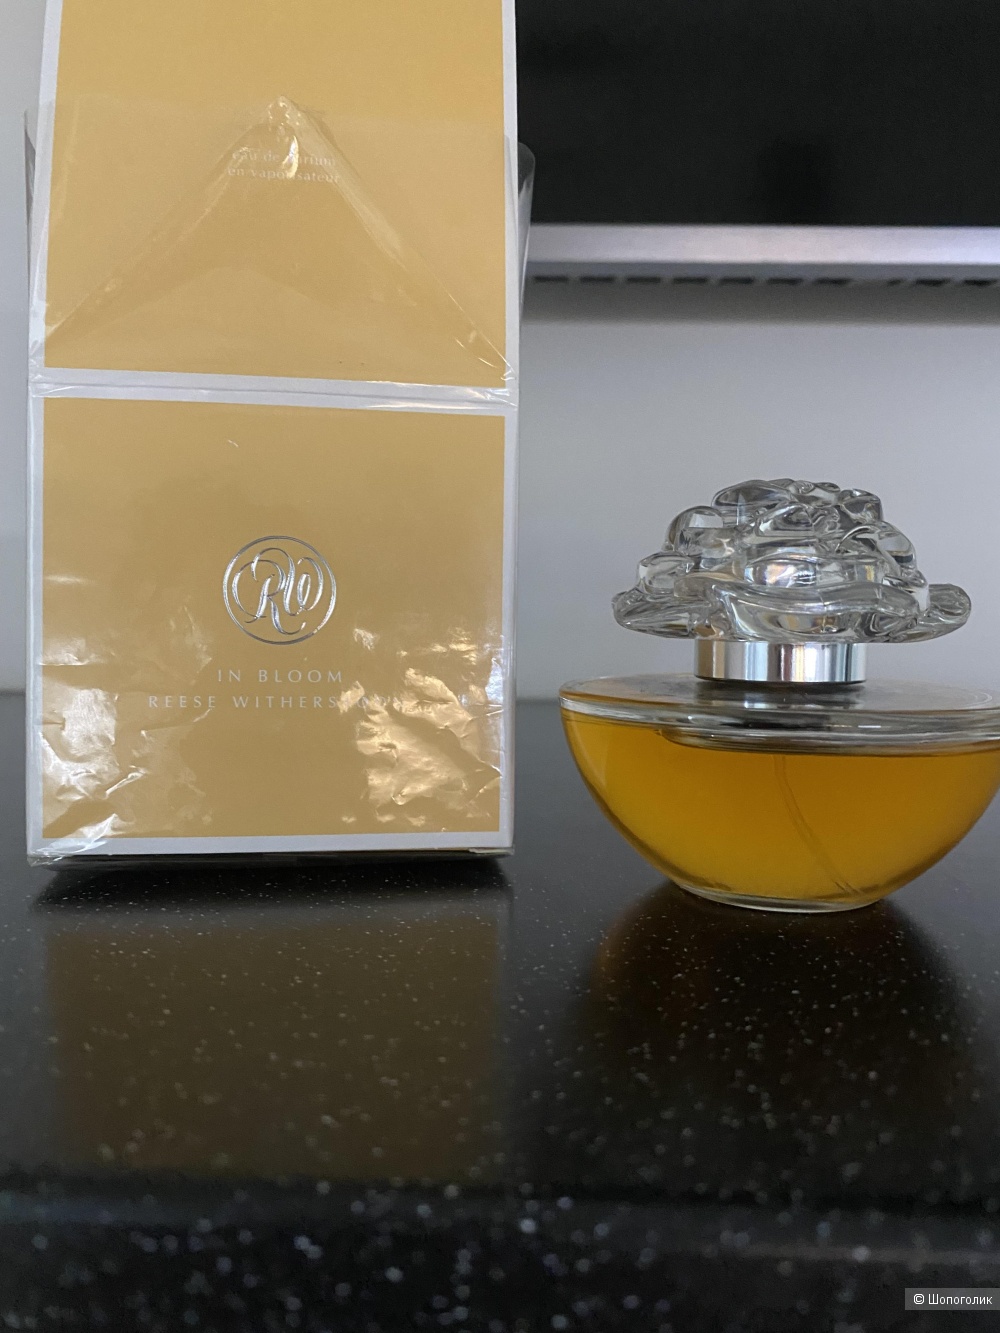 Avon In bloom Reese Witherspoon edp 50ml Винтаж